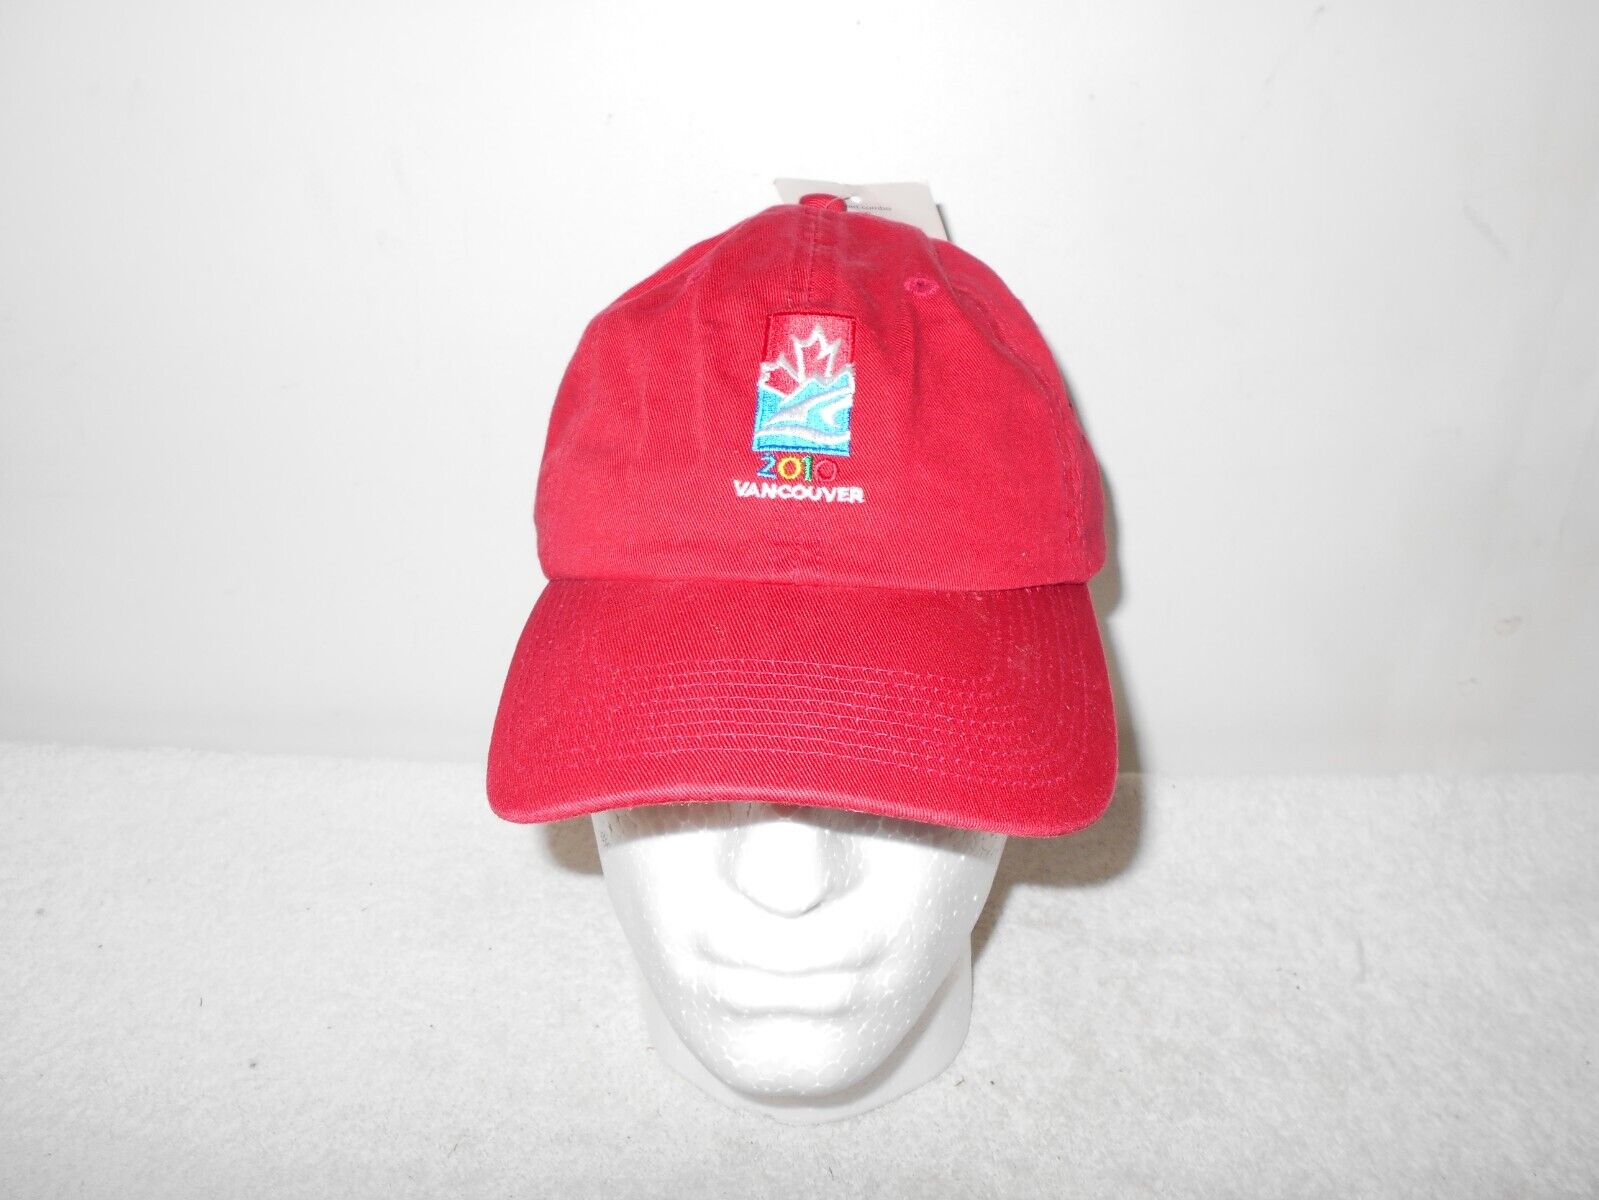 2010 NEW! W/TAGS VANCOUVER WINTER OLYMPICS MENS ADJUSTABLE HAT CAP